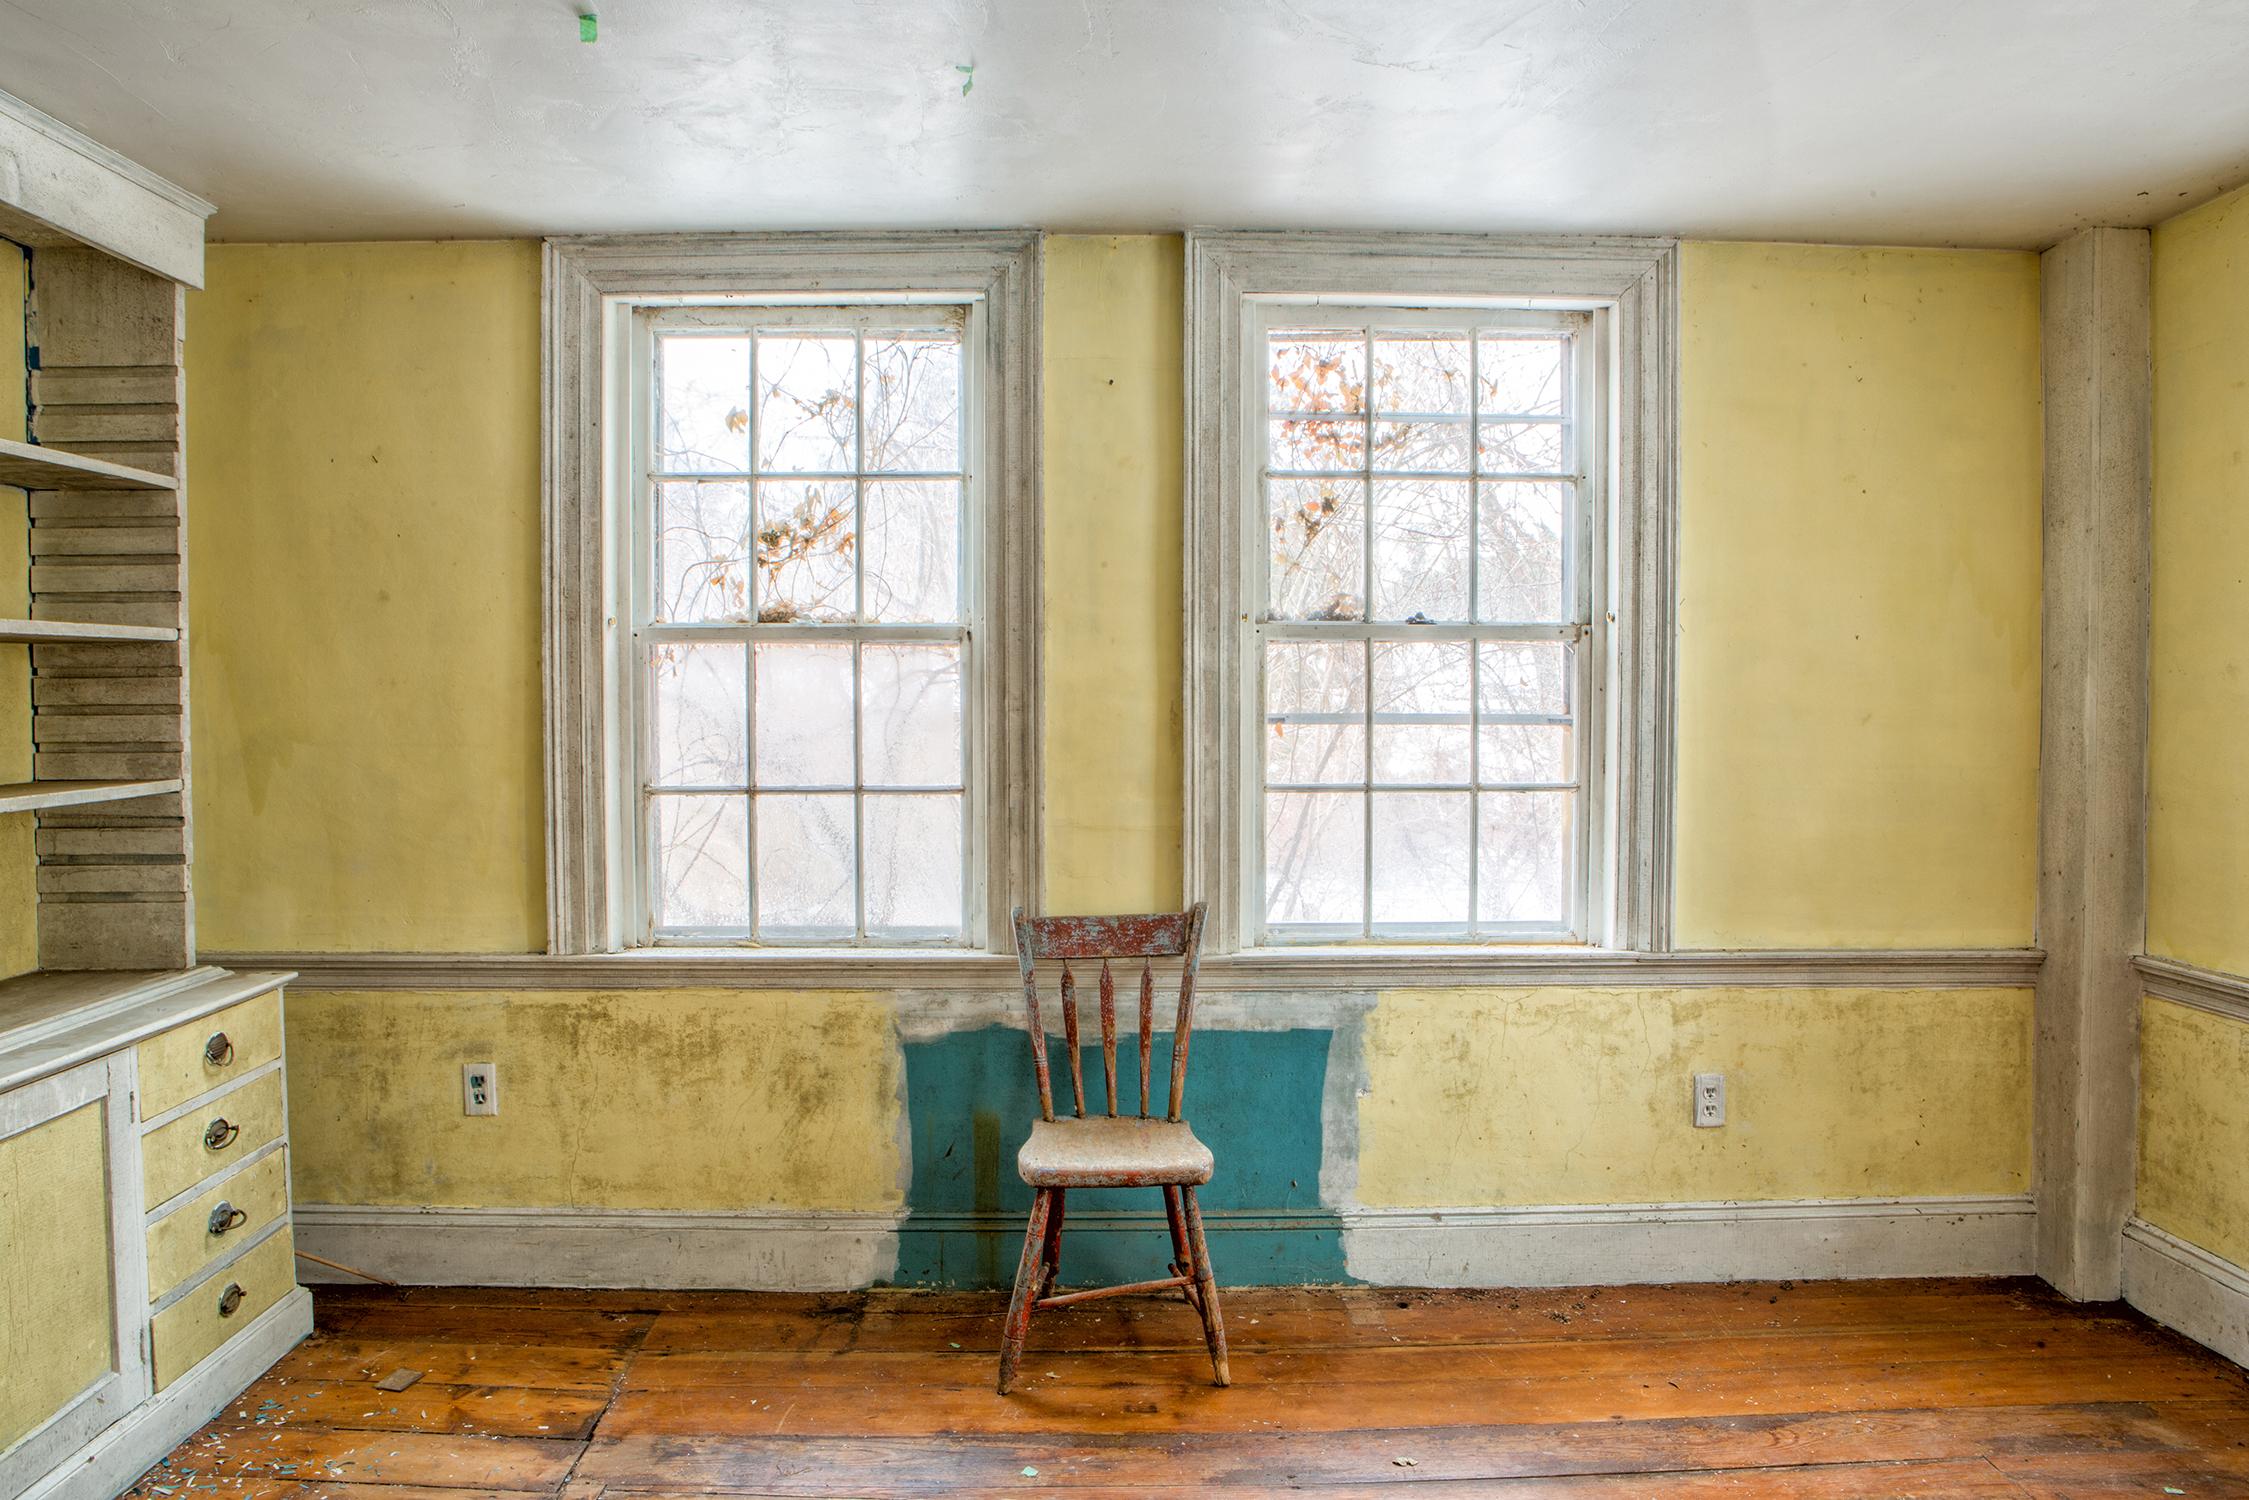 Rebecca Skinner Still-Life Photograph - "Yellow Room", contemporary, abandoned farmhouse, chair, blue, color photograph